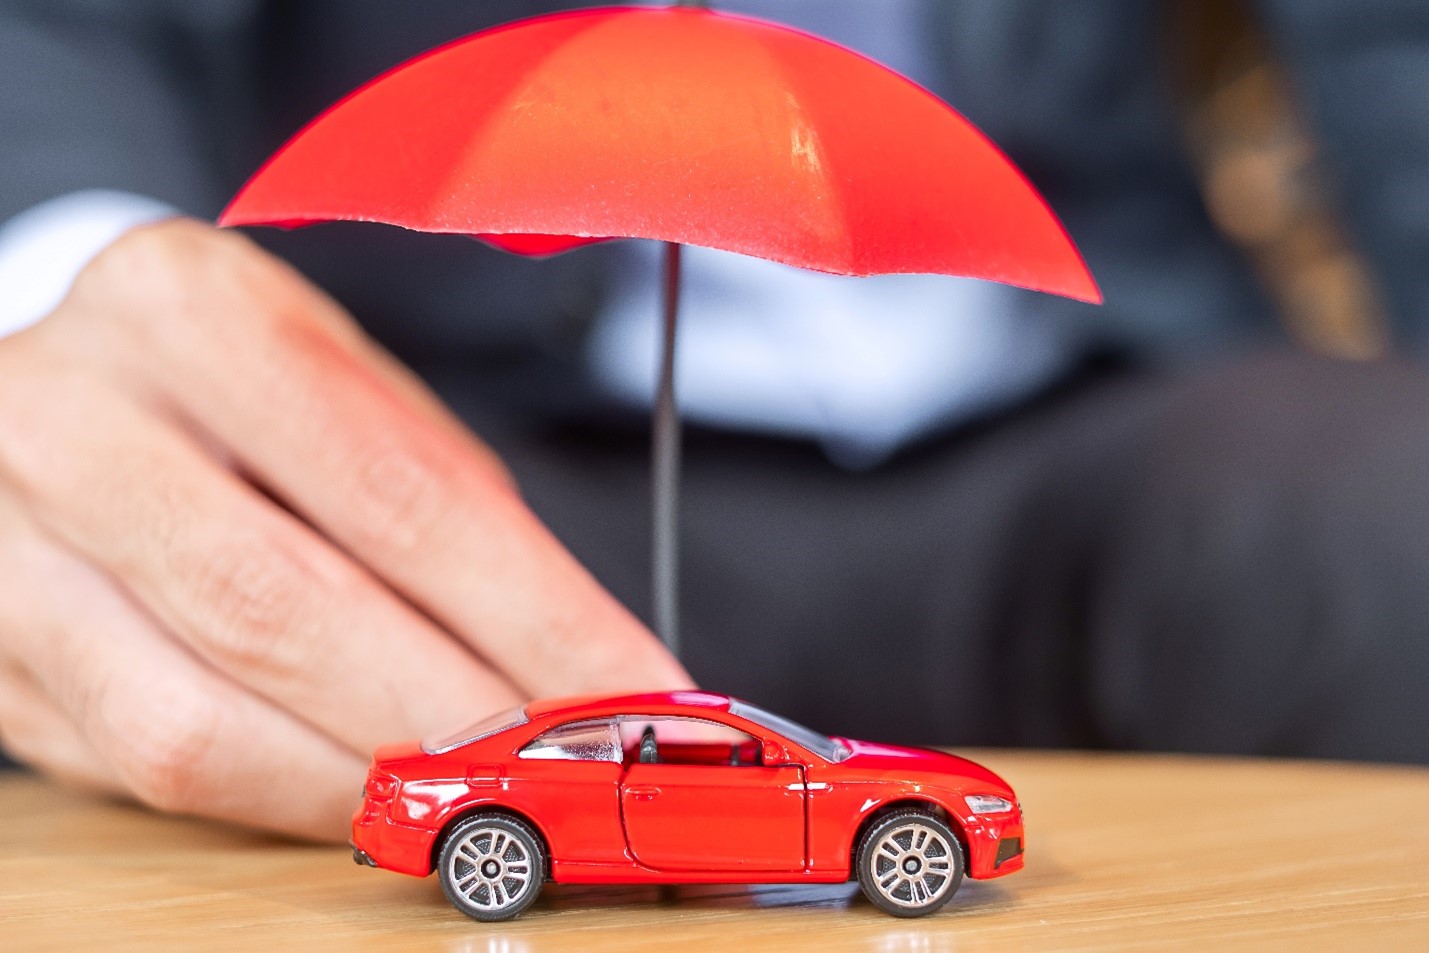 Auto insurance is a legal requirement in most states, and it can save drivers from costly expenses